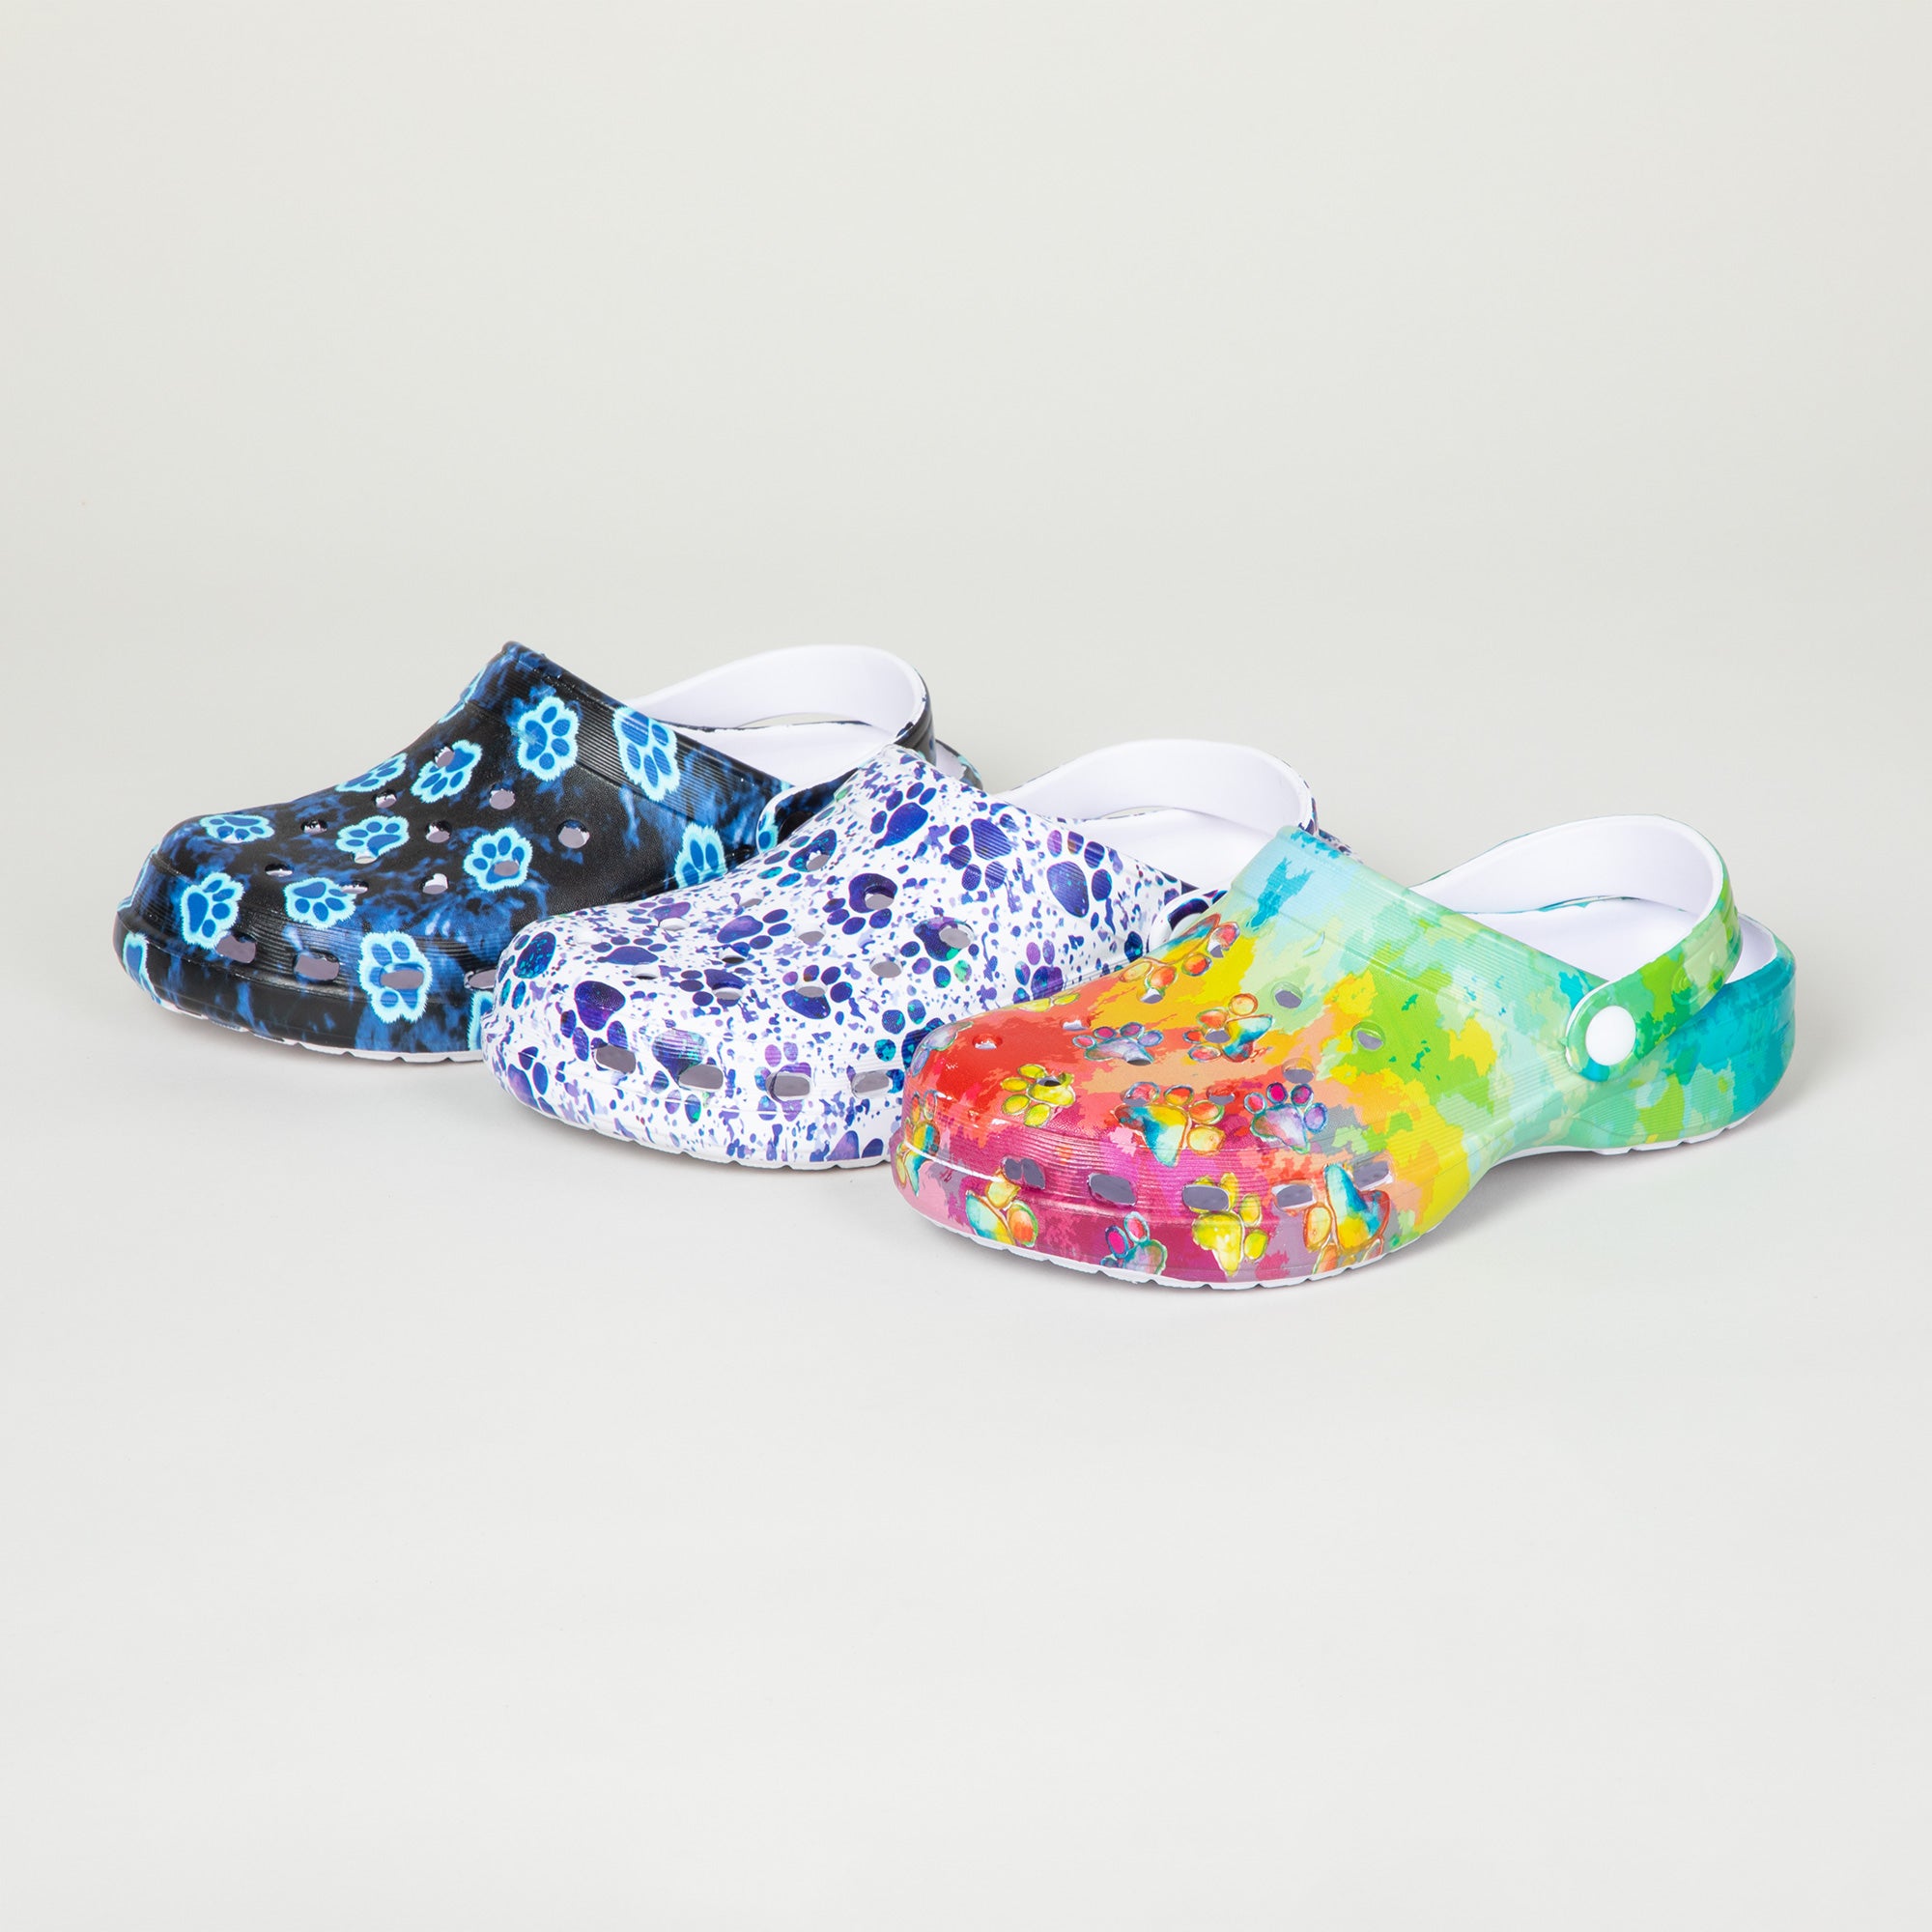 Super Comfy Paw Print Clogs - Painted Paws - 11